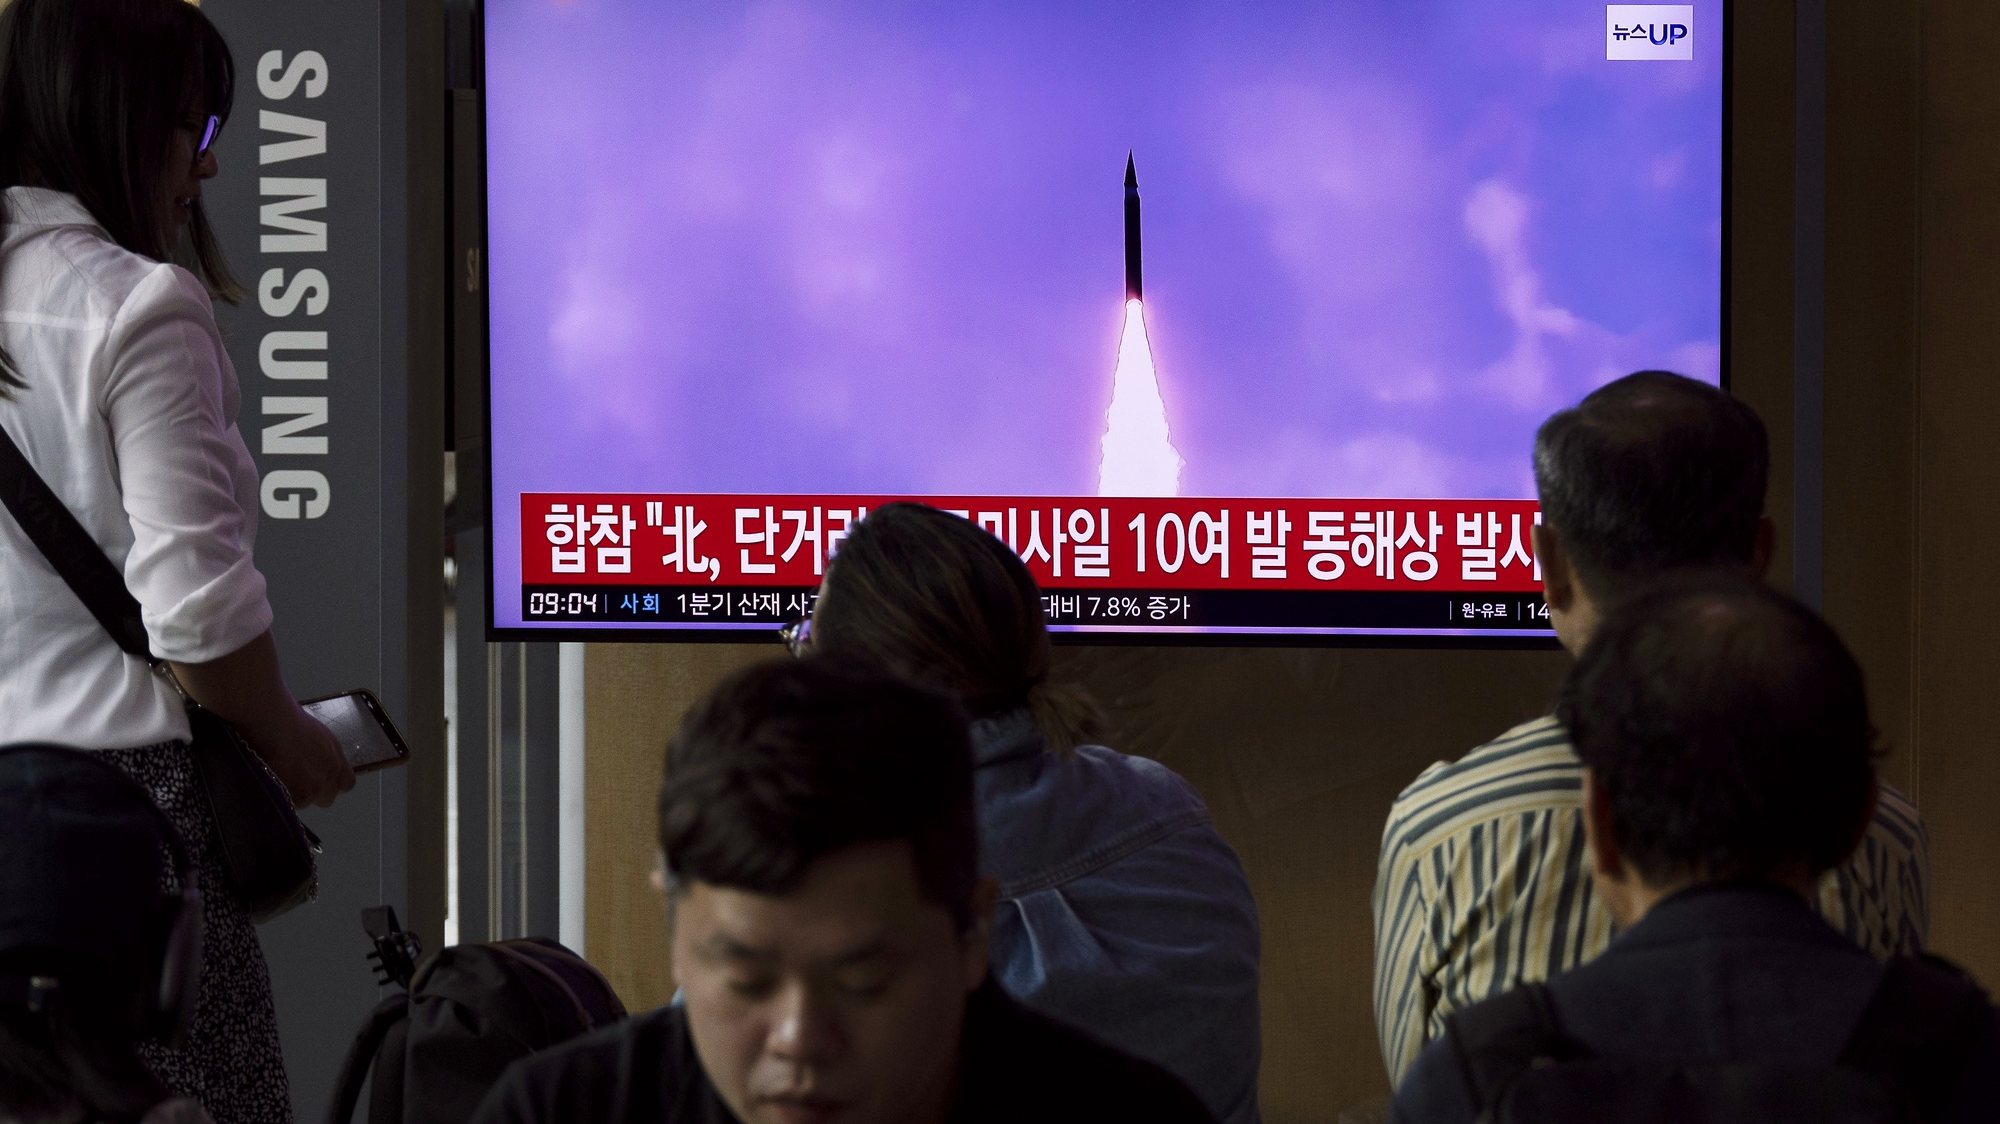 epaselect epa11378591 epa11378570 People watch a news segment on North Korea, at a station in Seoul, South Korea, 30 May 2024. According to South Korea&#039;s Joint Chiefs of Staff (JCS), North Korea launched several ballistic missiles into the East Sea on 30 May.  EPA/JEON HEON-KYUN  EPA-EFE/JEON HEON-KYUN ALTERNATE TONING AND CROP